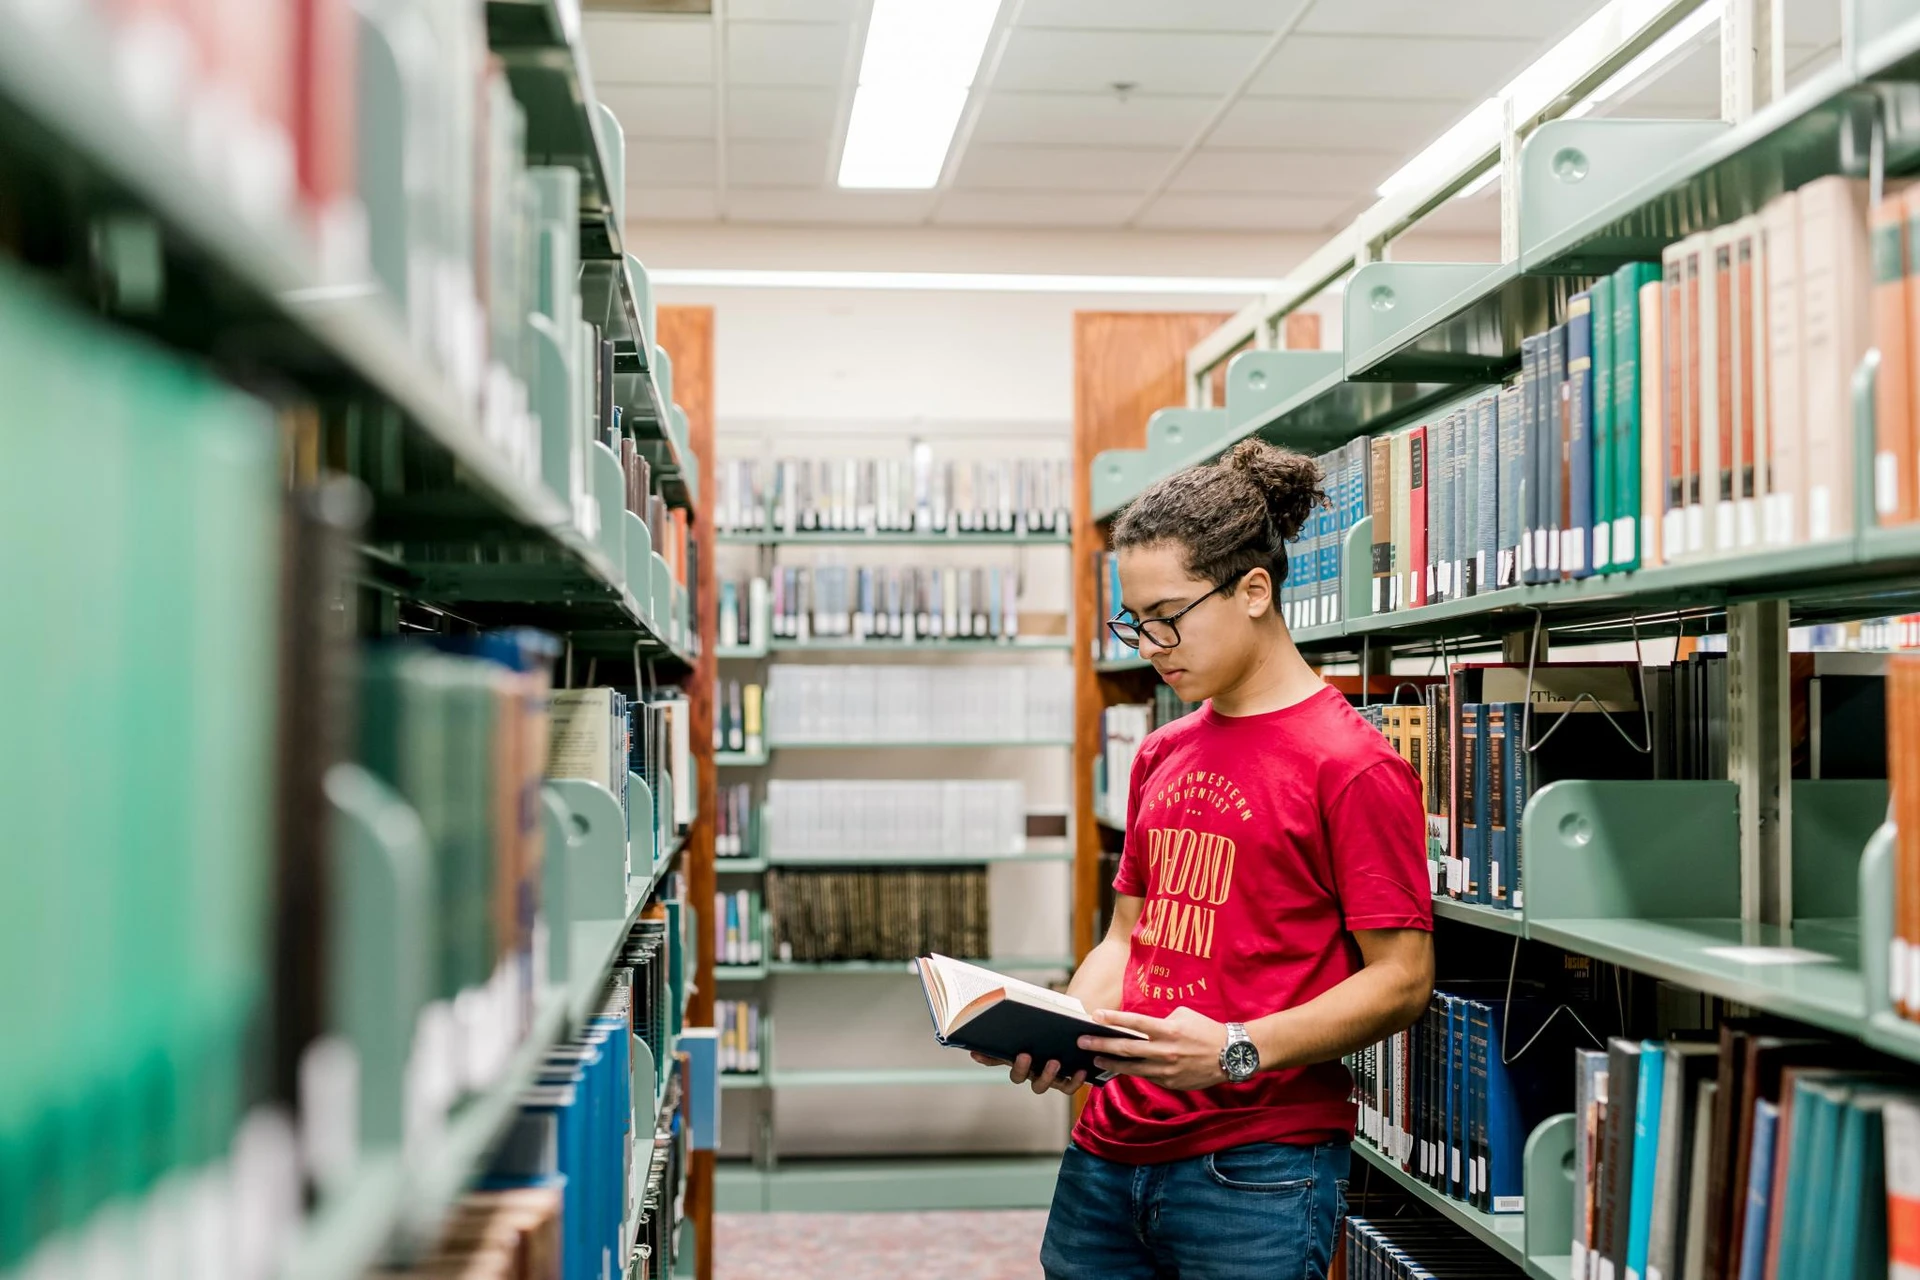 A male student with his hair tied up stands in between the library shelves as he reads through a book